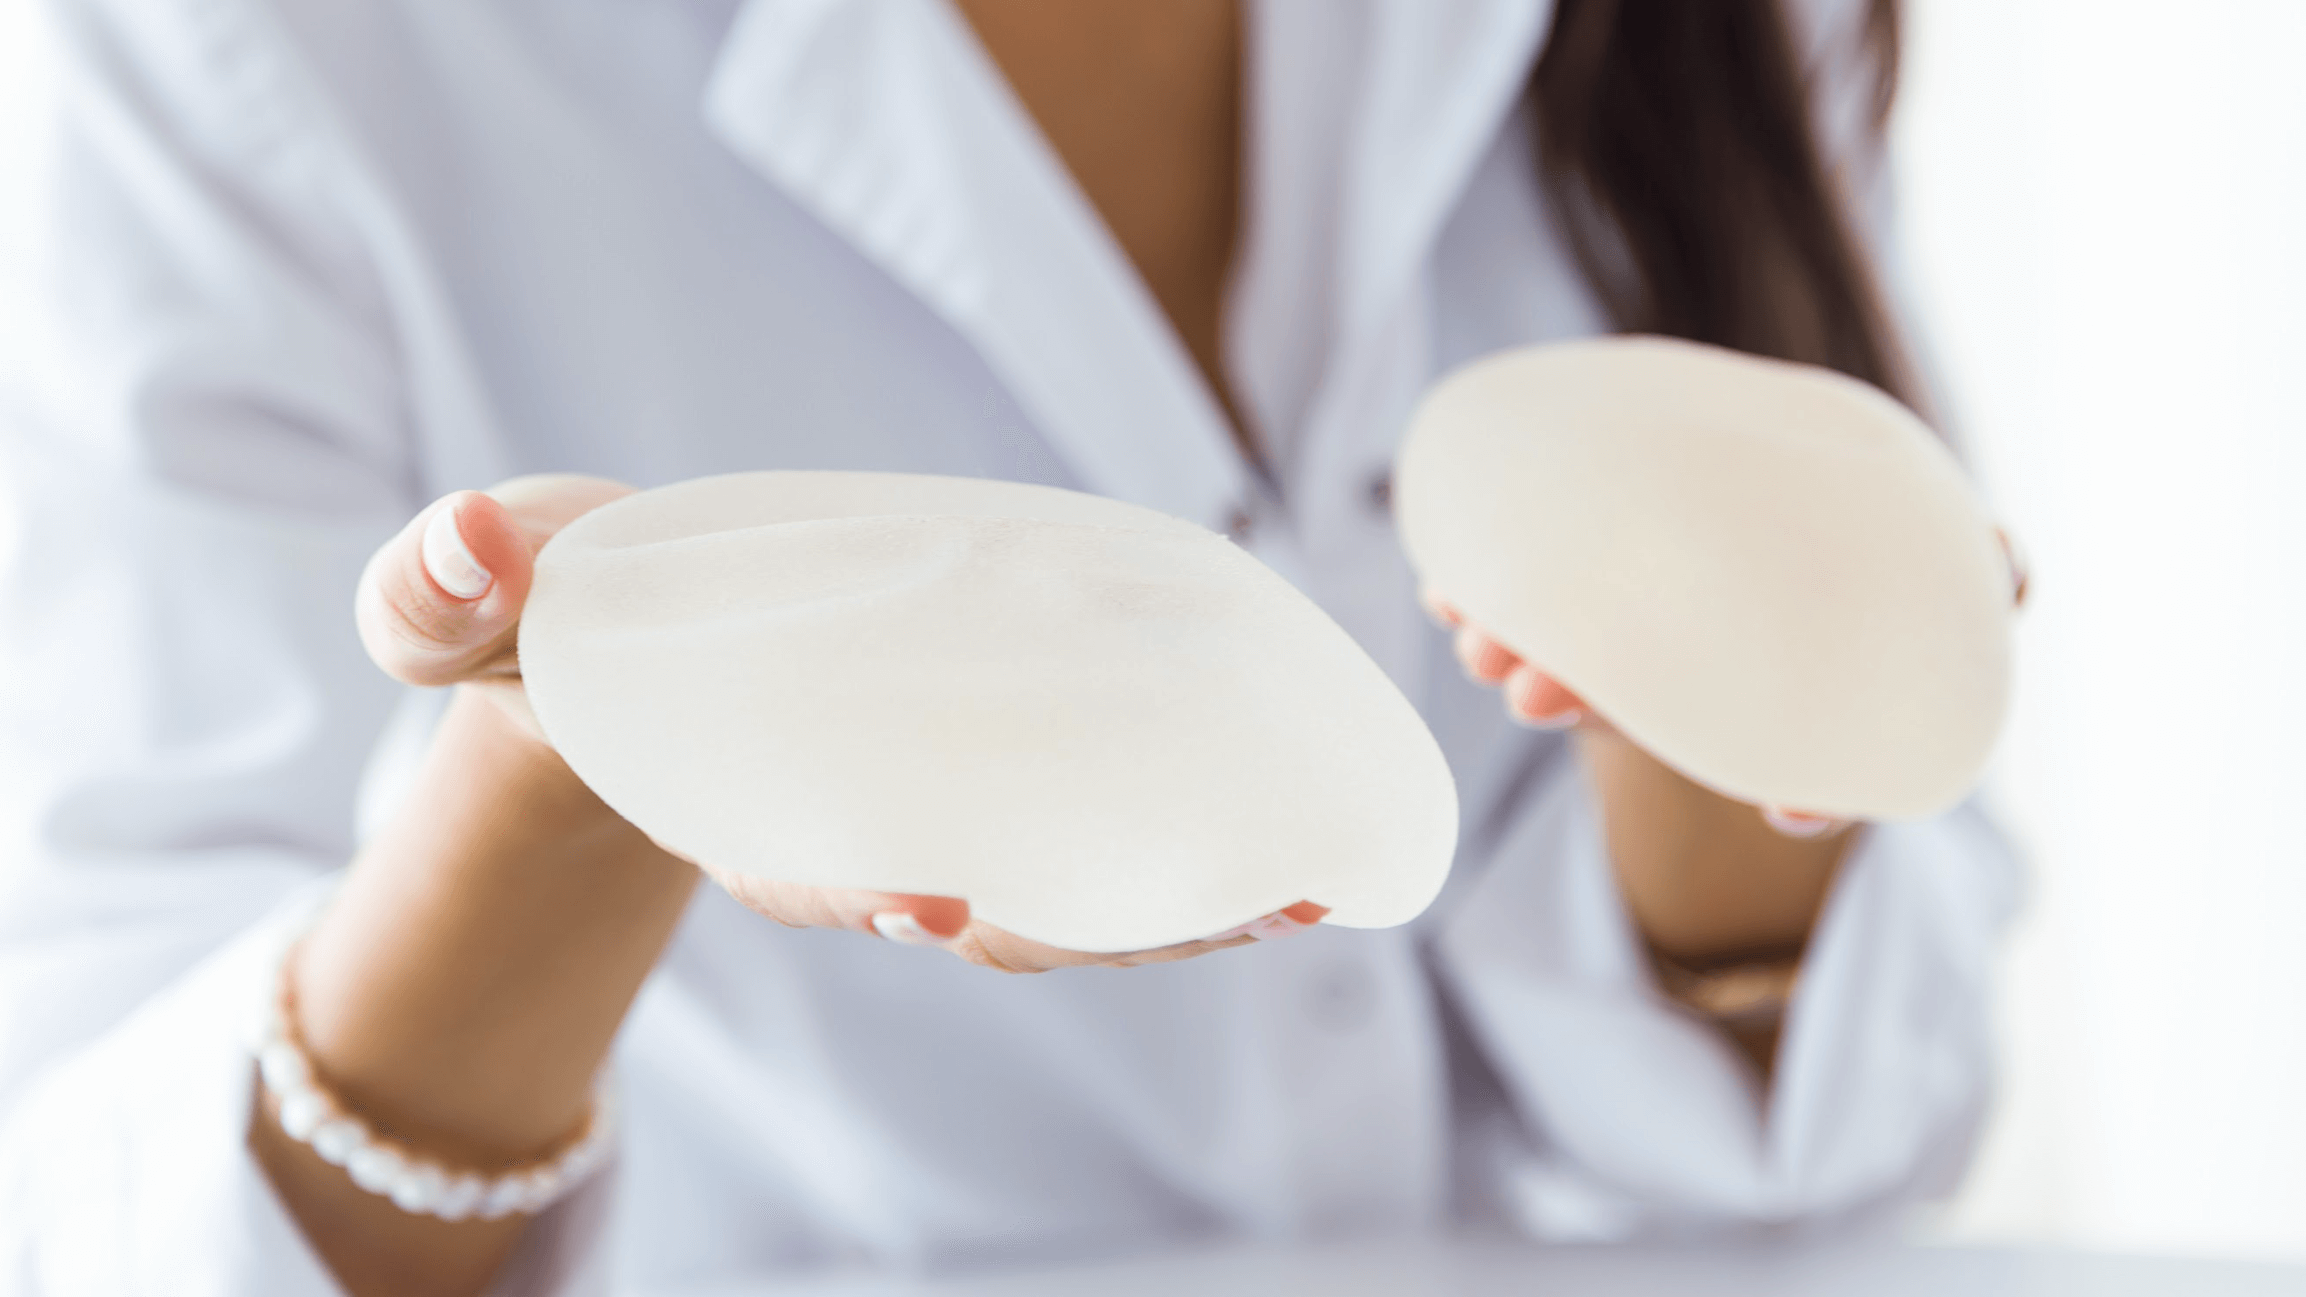 How Do I Choose Between Silicone And Saline Breast Implants?